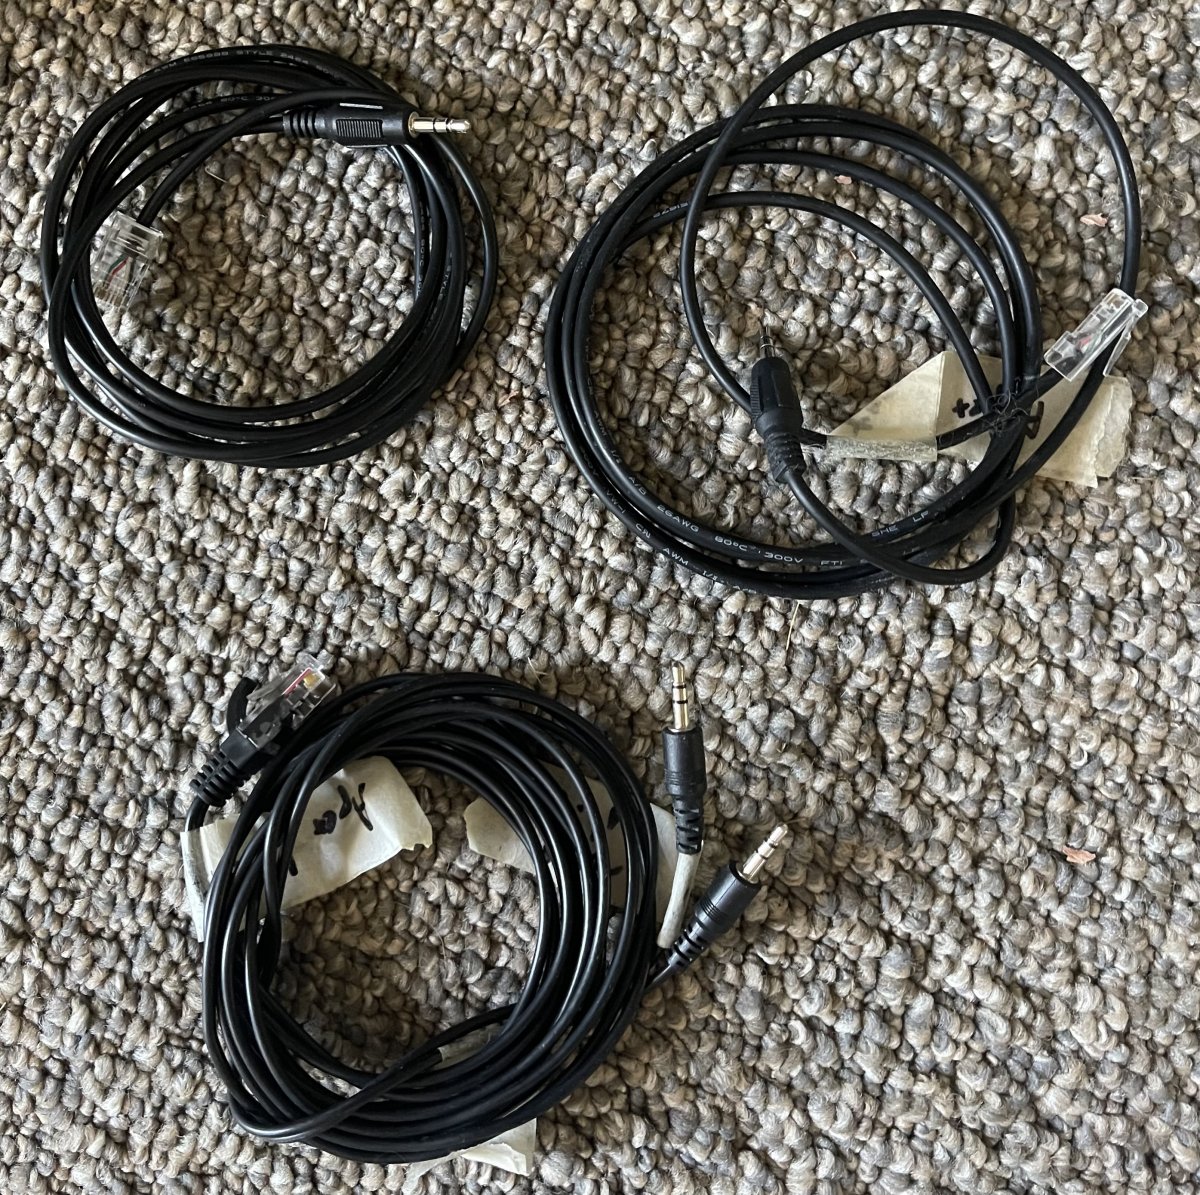 kessil to apex cable.jpg